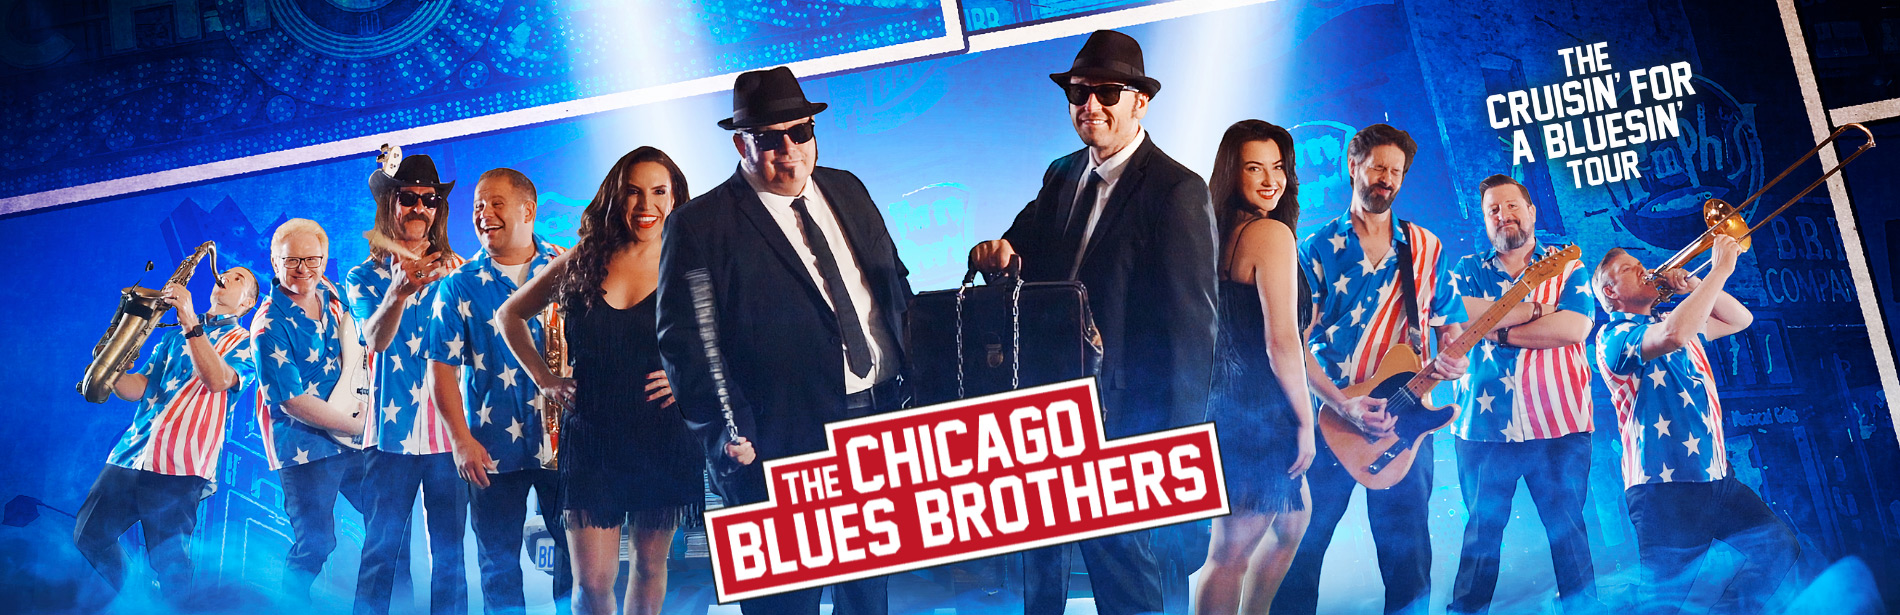 The Chicago Blues Brothers – The Cruisin For A Bluesin Tour